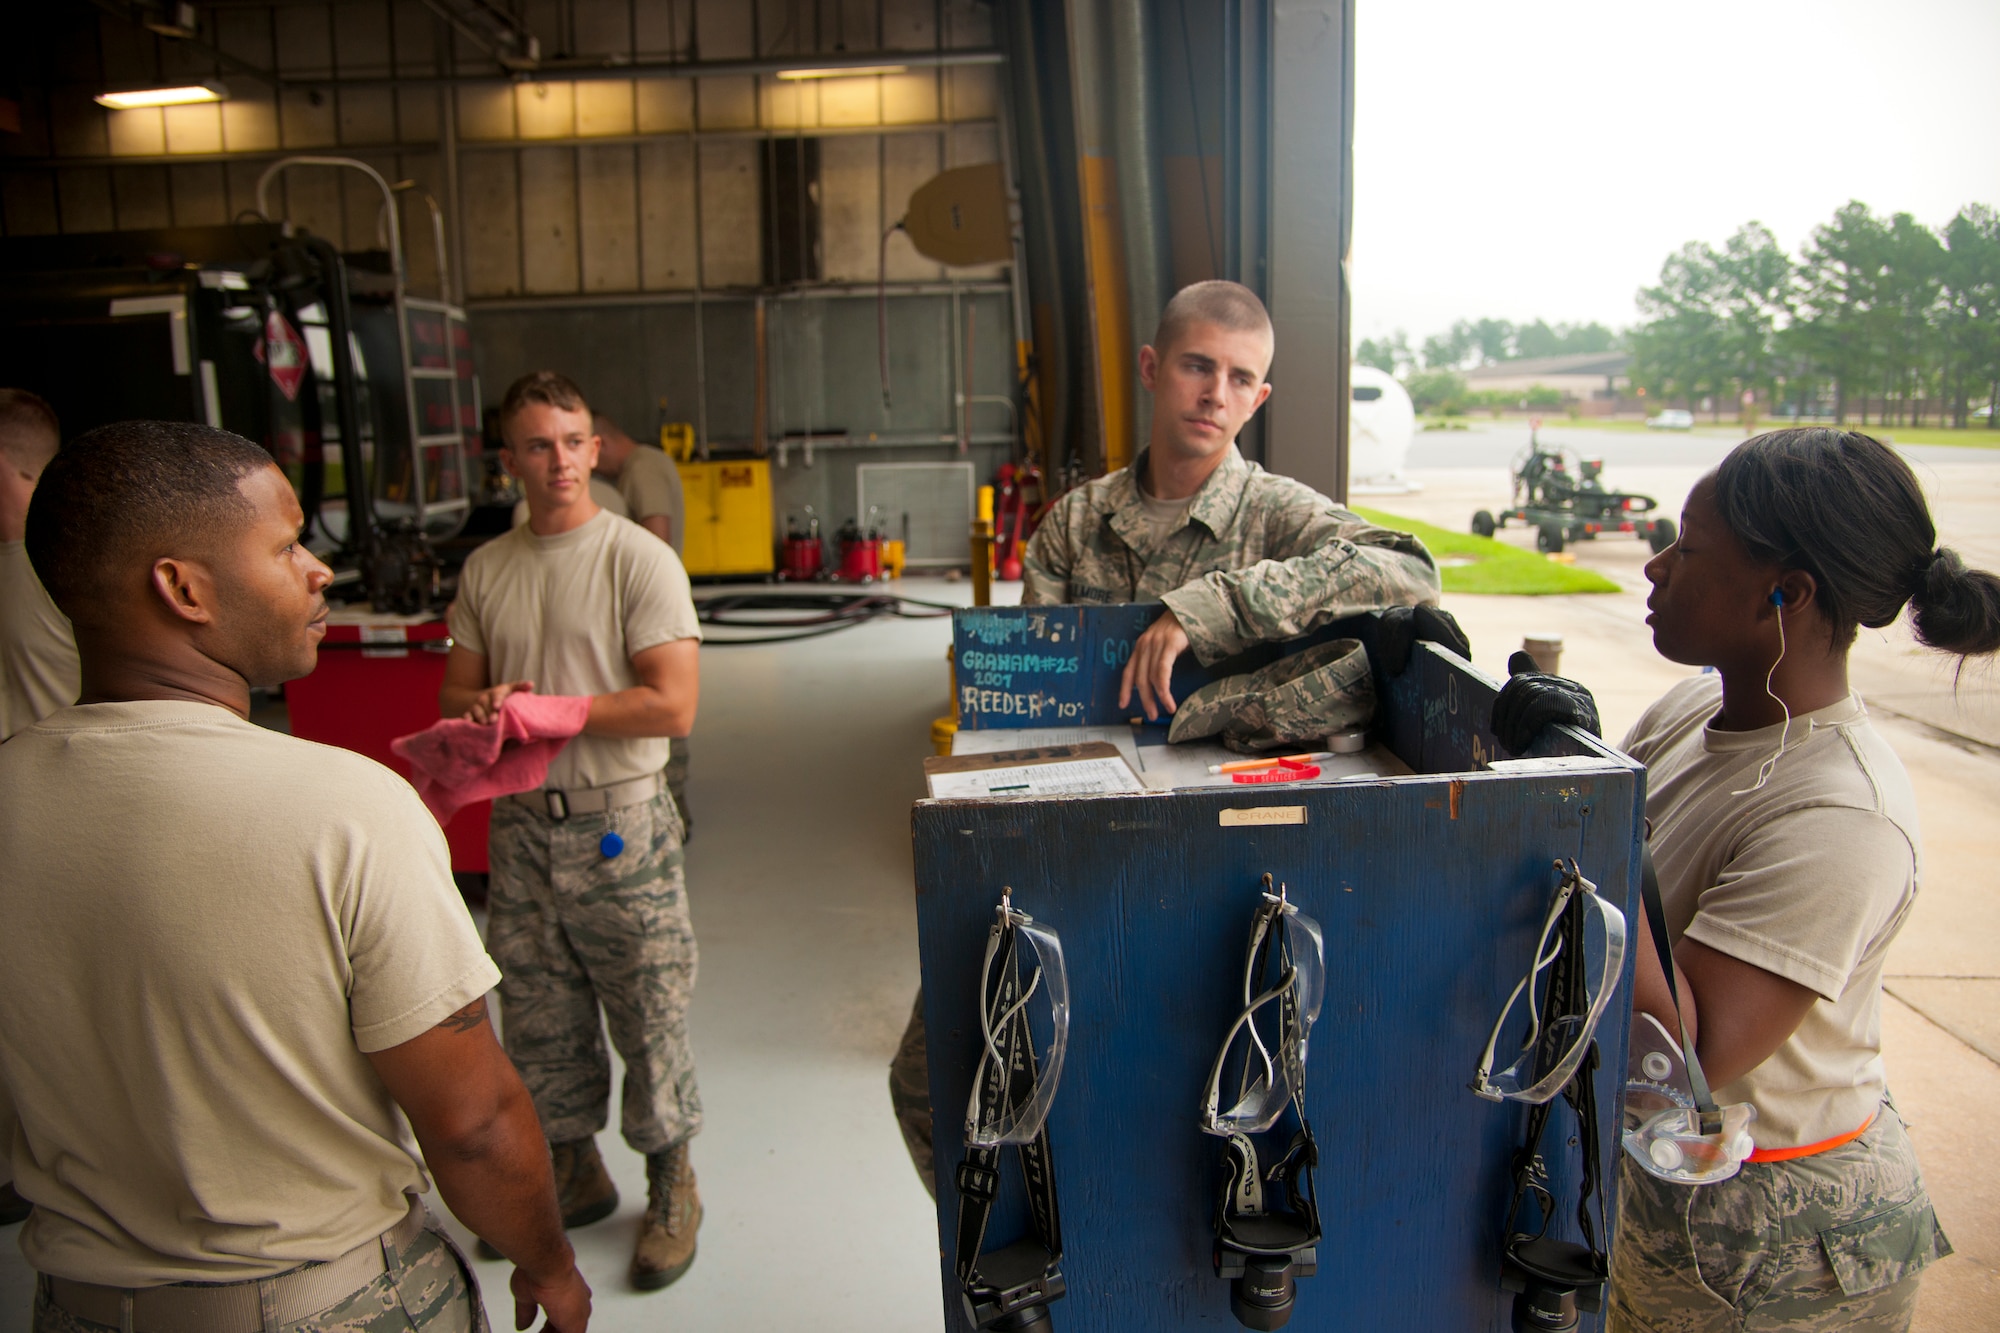 U.S. Air Force Airman from the 23d Logistics Readiness Squadron petroleum, oils and lubricants flight discuss the next steps to take after inspecting fuel trucks at Moody Air Force Base, Ga., Aug. 7, 2012. POL has a combined 6 main departments and has issued approximately 8.2 million gallons of JP-8 fuel in the past year. (U.S. Air Force photo by Airman 1st Class Paul Francis/Released)
